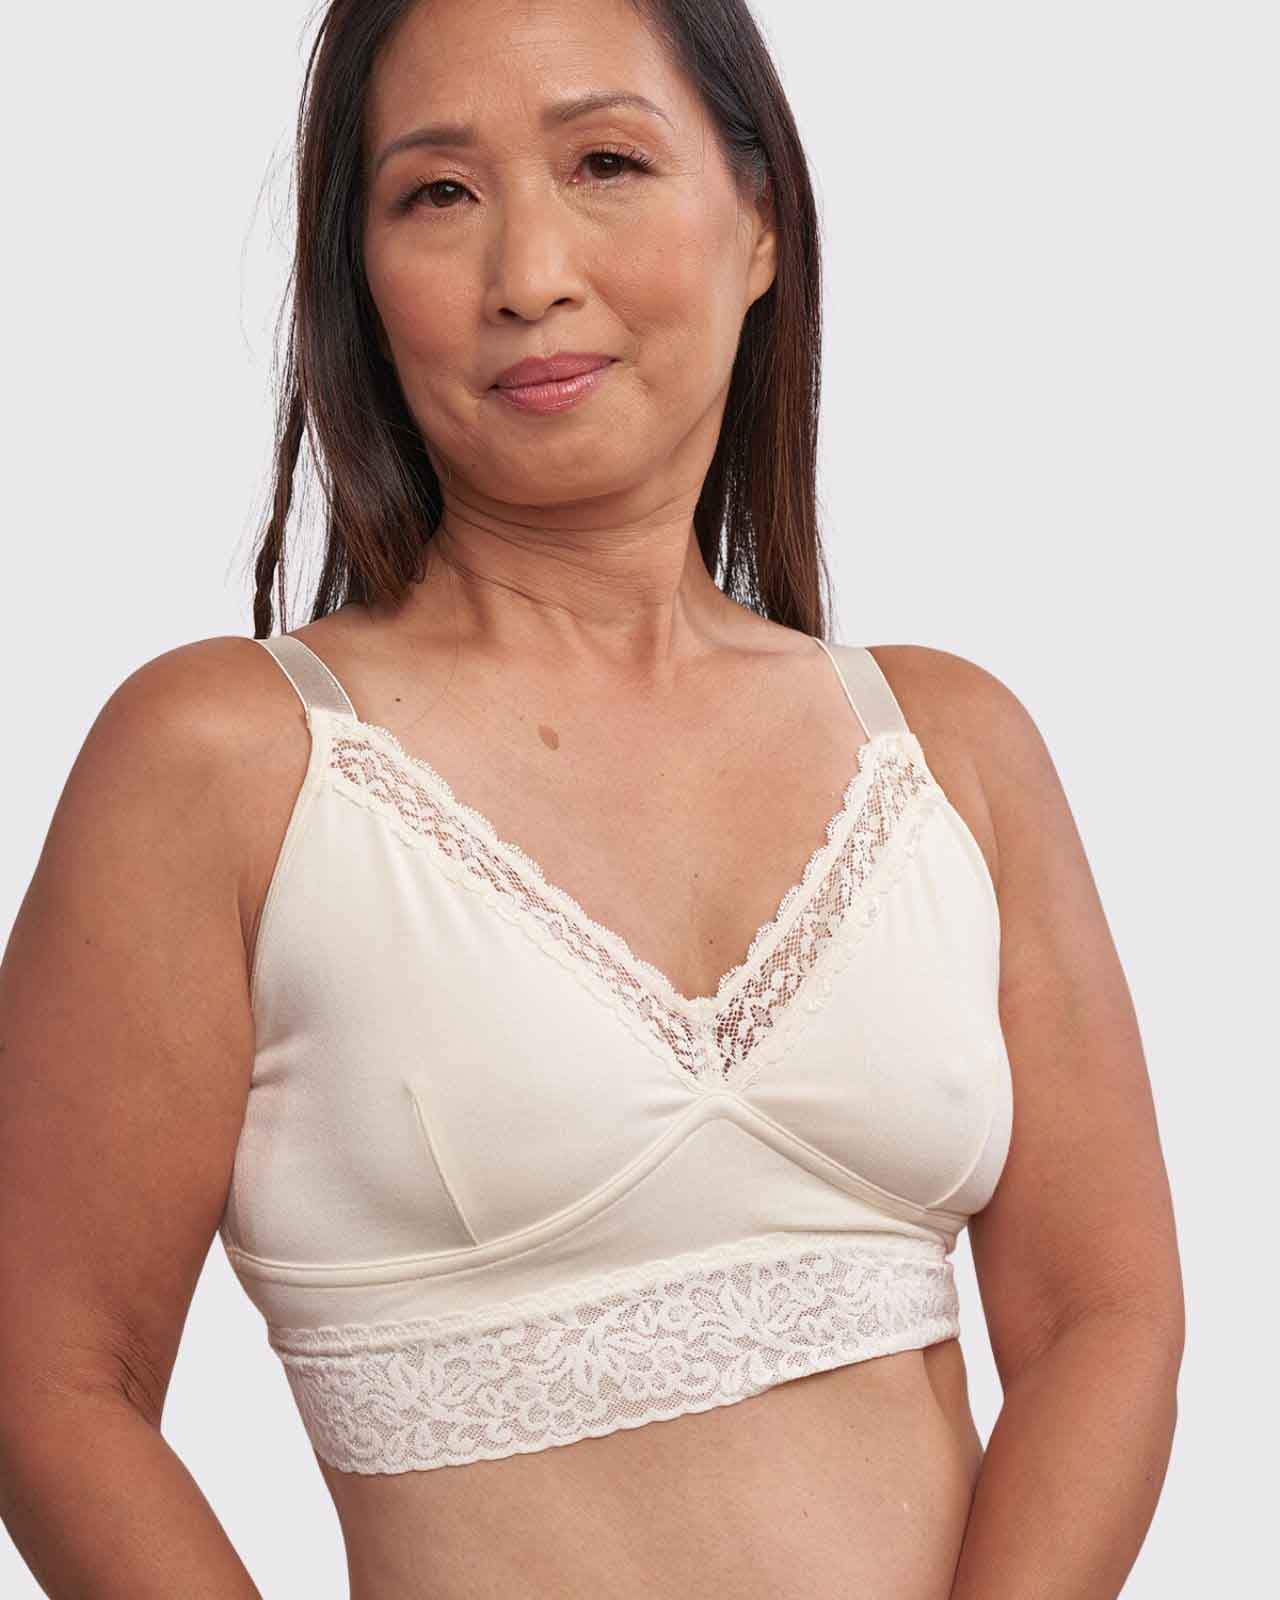 AnaOno Women's Delilah Ultra-Soft Lace Mastectomy Bralette Ivory - Small